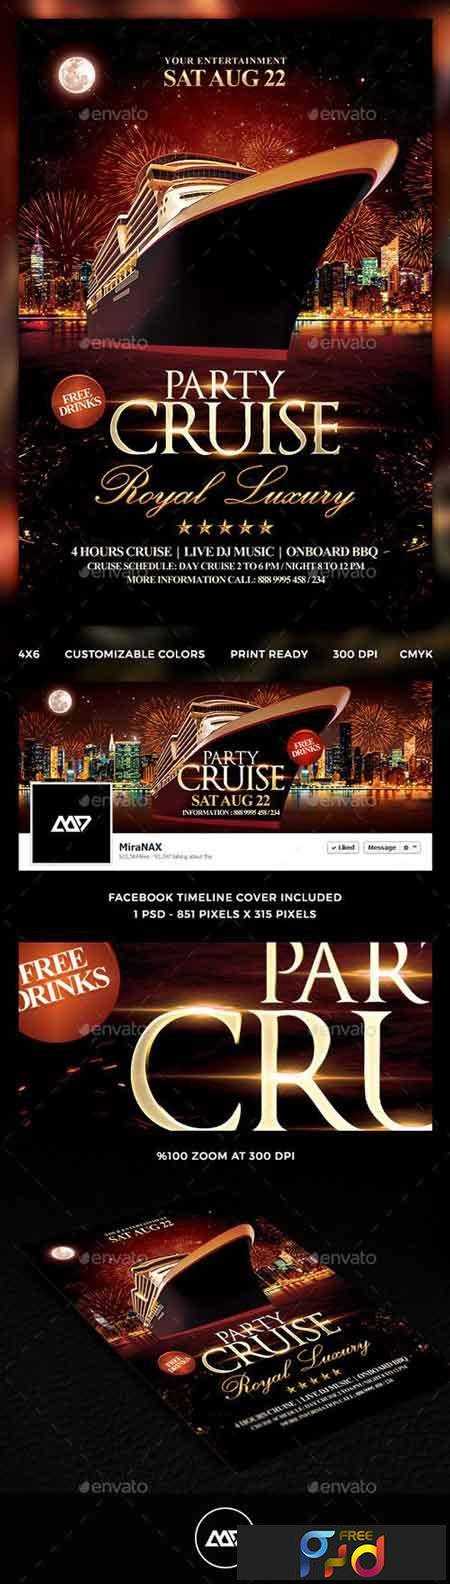 Cruise Flyer Template Free from freepsdvn.com